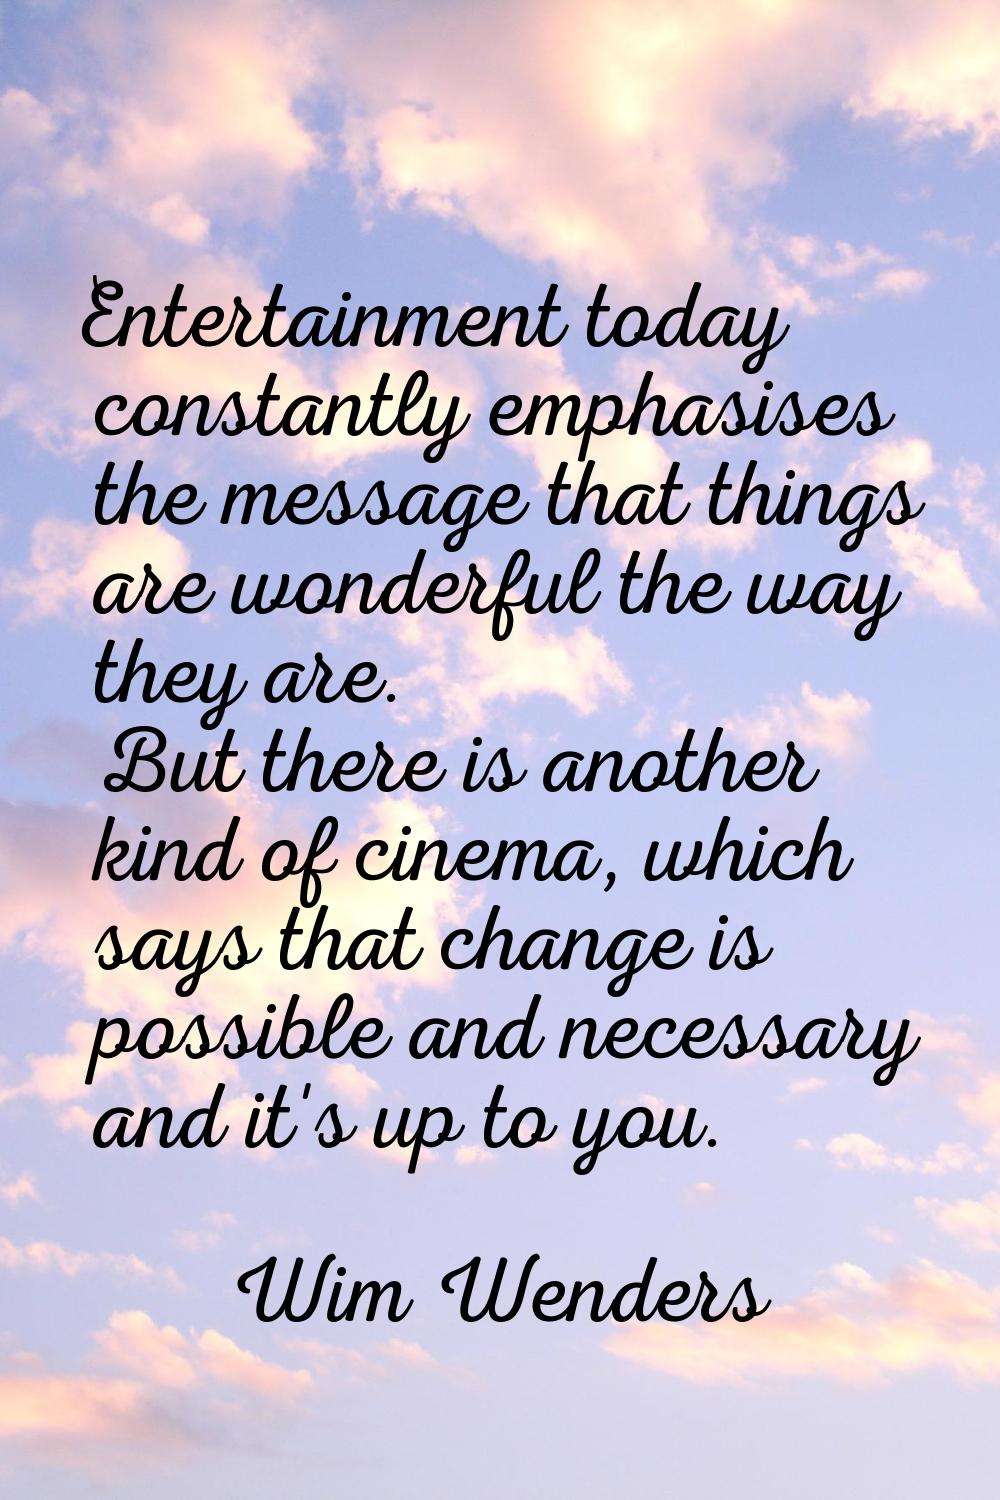 Entertainment today constantly emphasises the message that things are wonderful the way they are. B